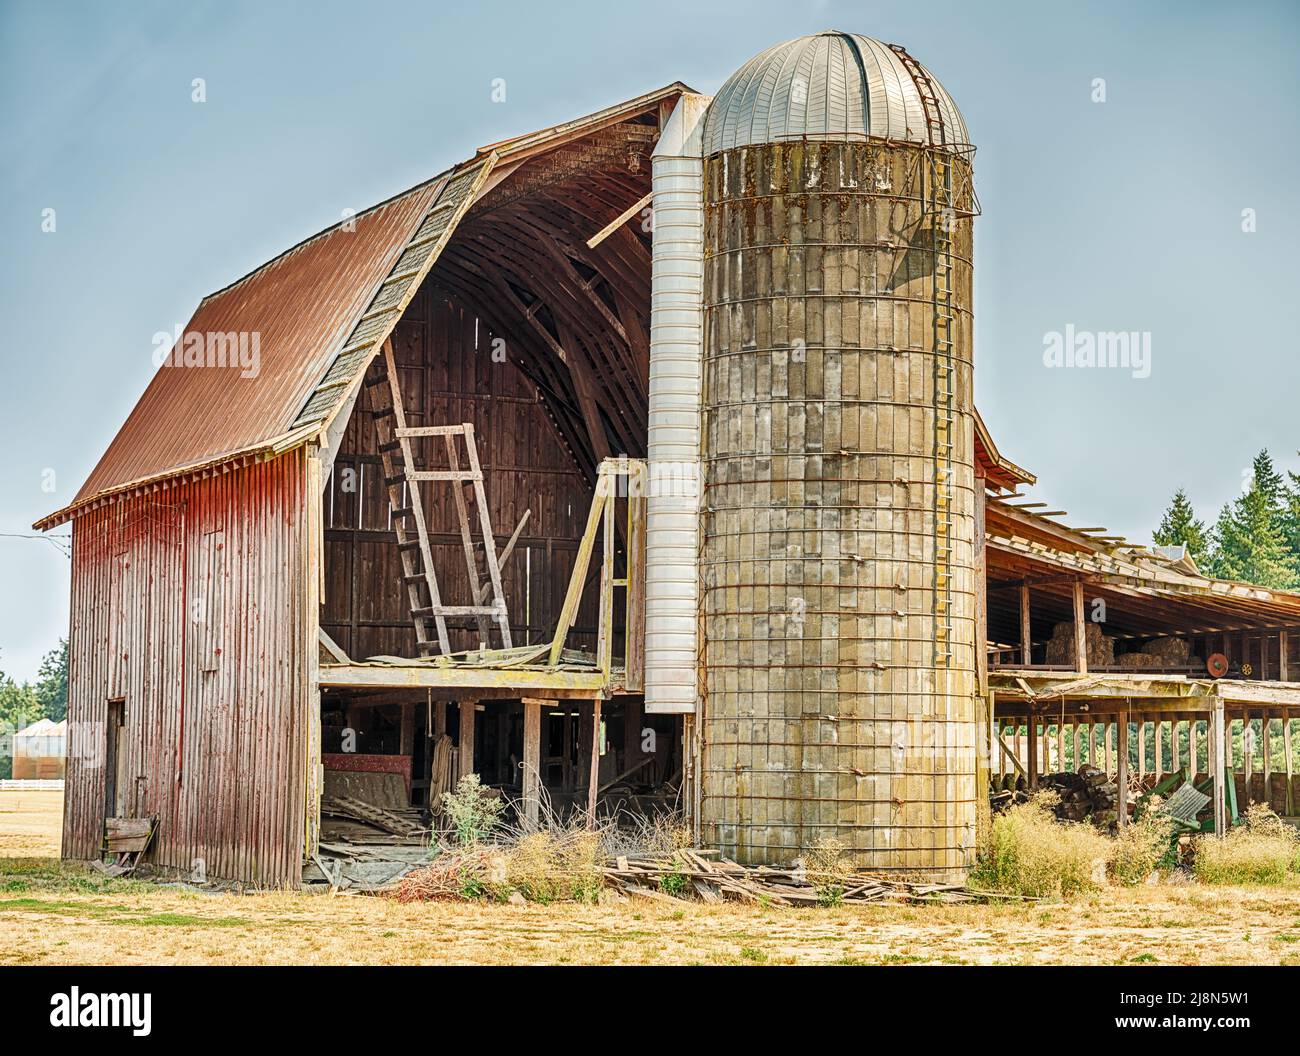 A concrete silo stands next to a barn with an open side wall. Stock Photo